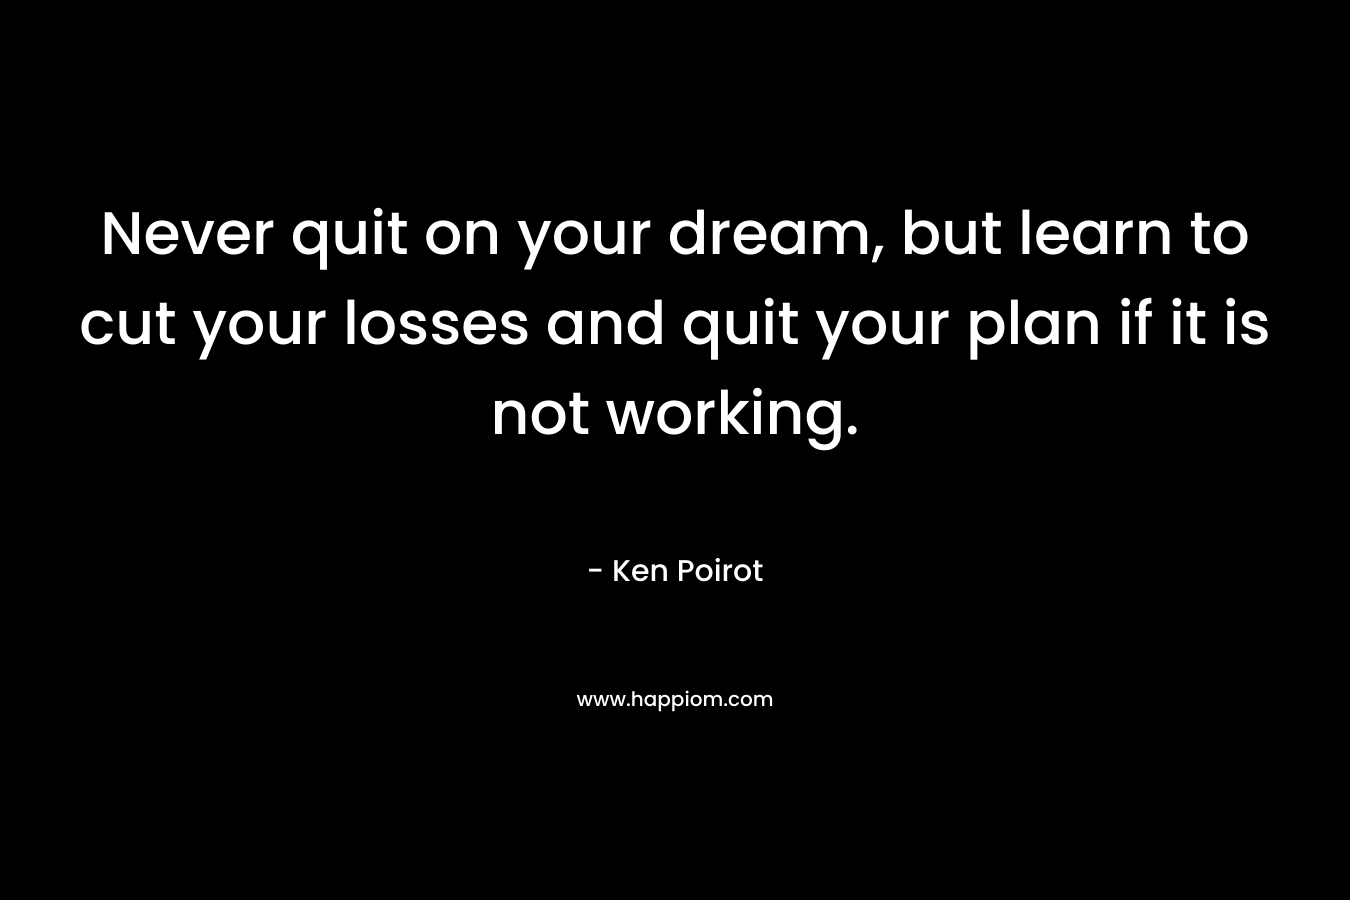 Never quit on your dream, but learn to cut your losses and quit your plan if it is not working. – Ken Poirot